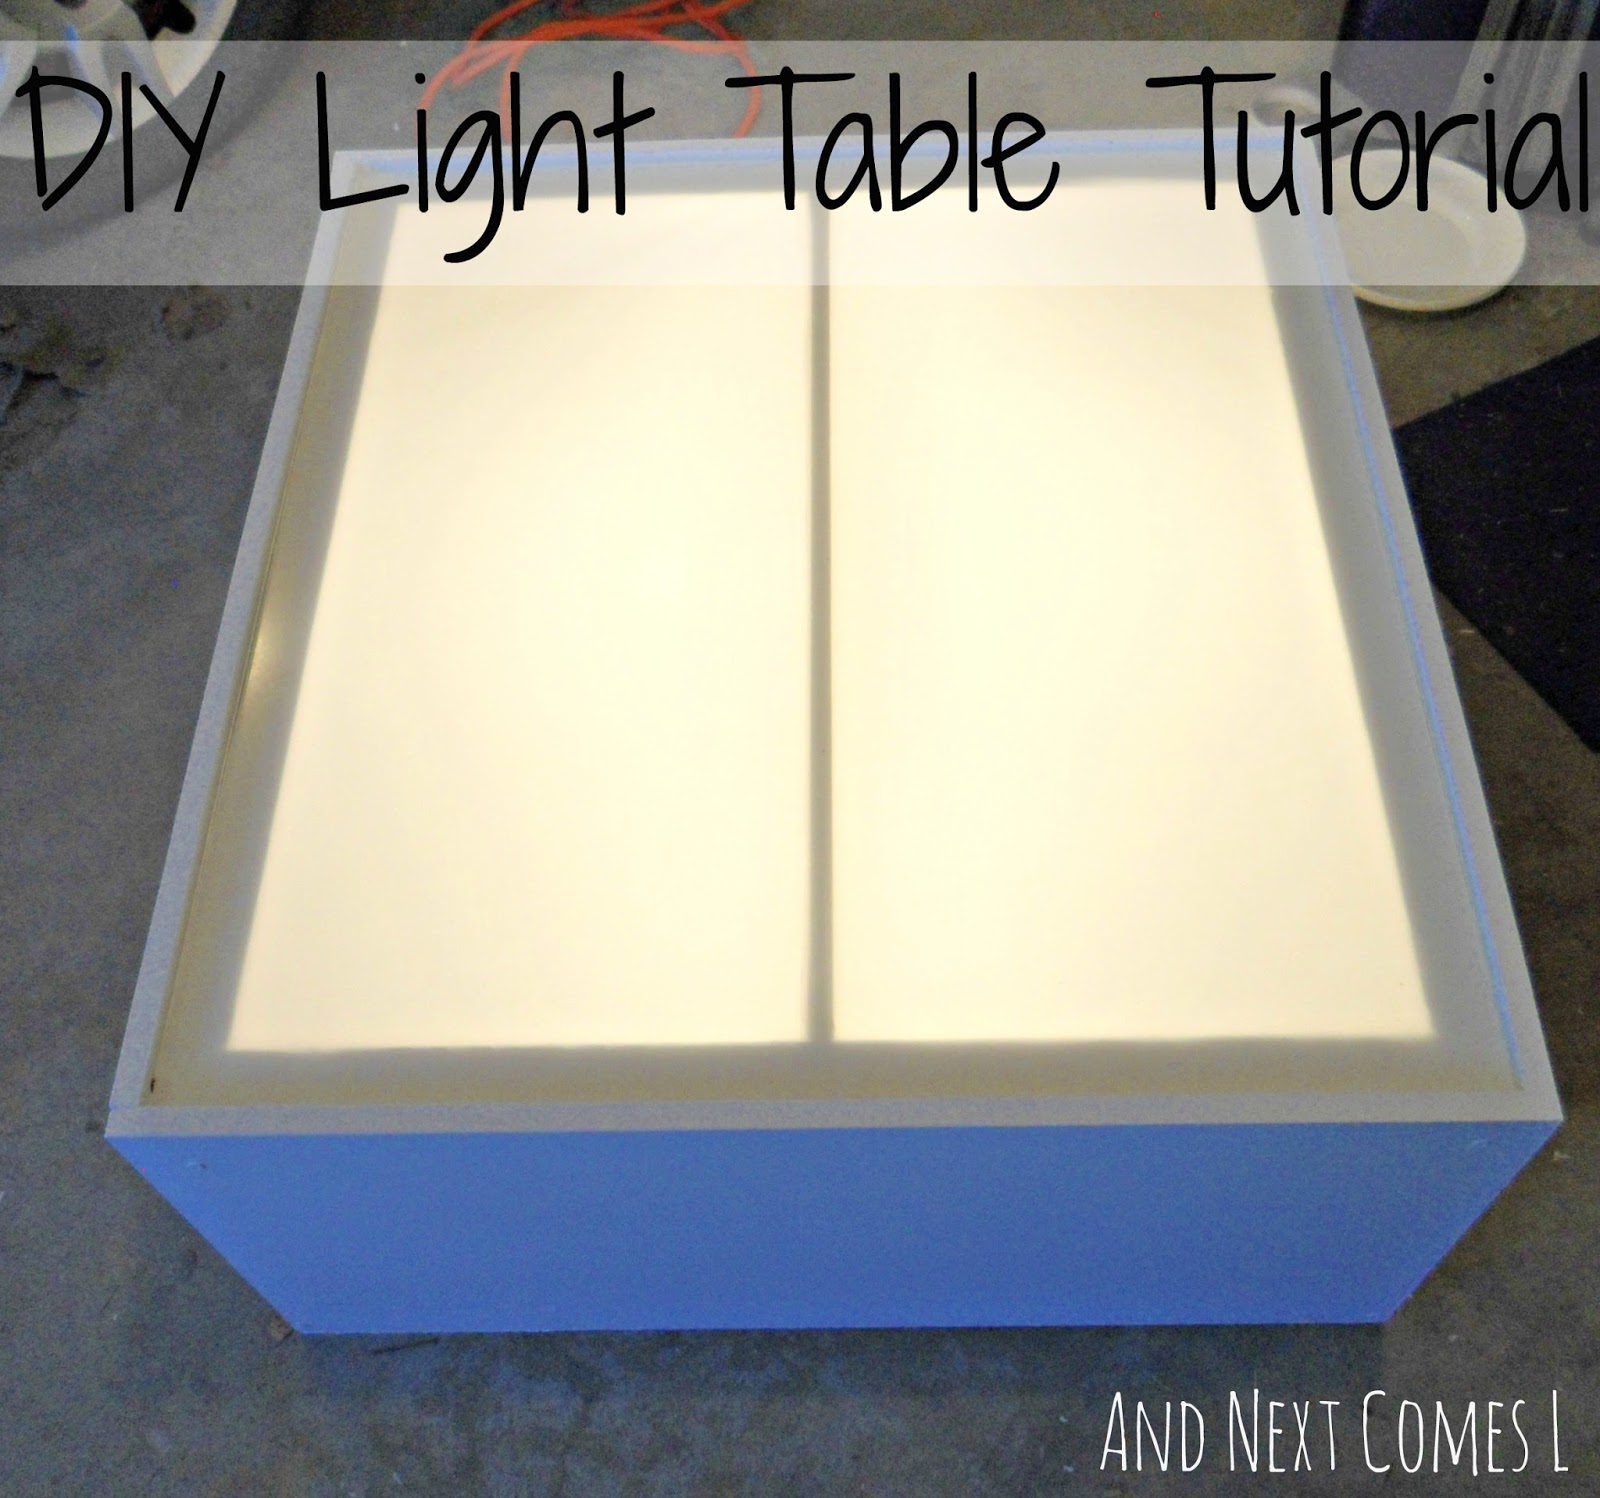 DIY Light Table Tutorial  And Next Comes L - Hyperlexia Resources